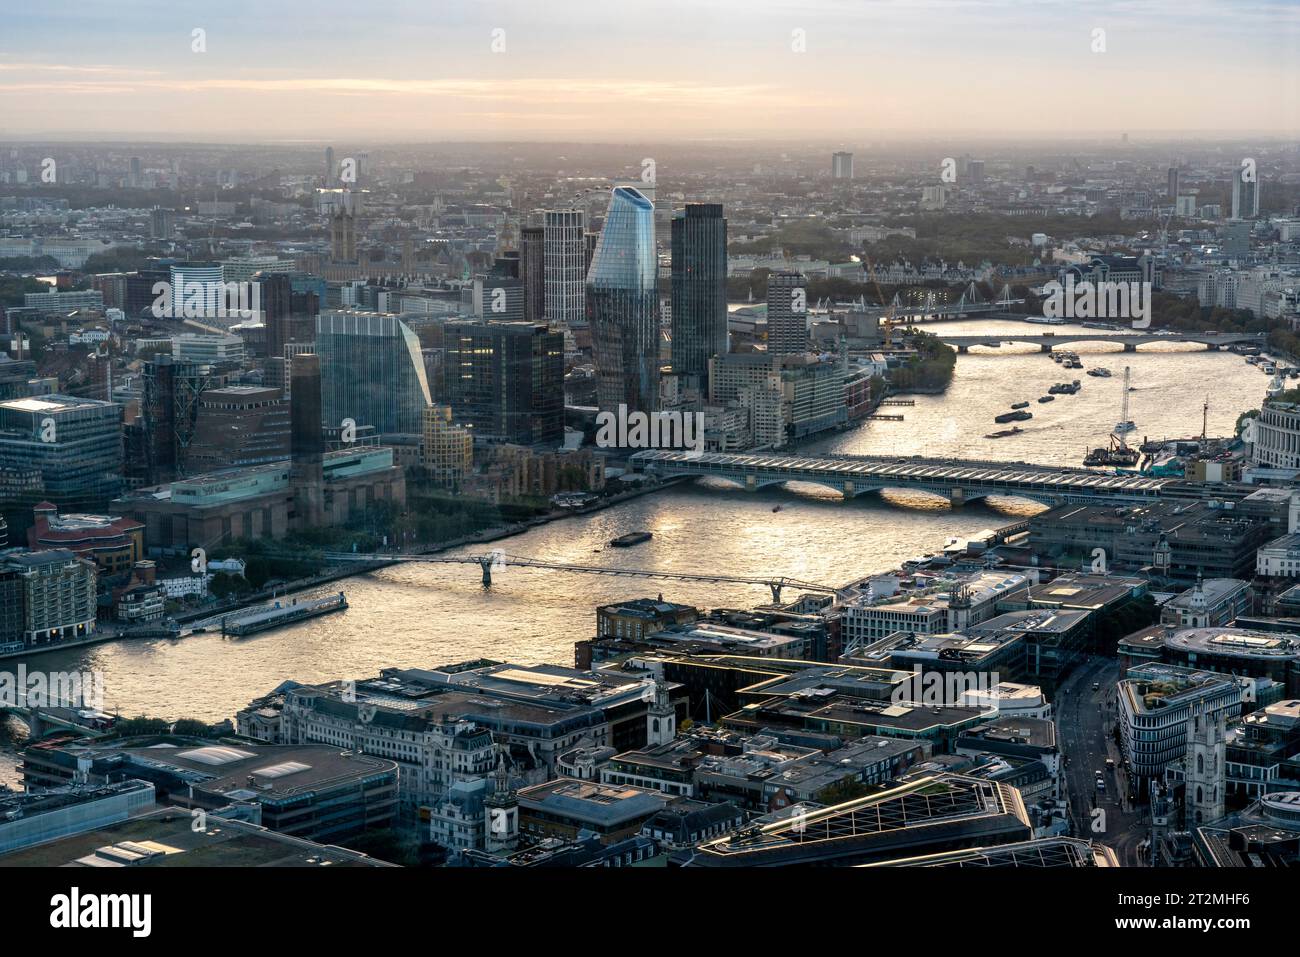 An Aerial View Of The River Thames From The Lookout Viewing Platform at No 8 Bishopsgate, City of London, London, UK. Stock Photo